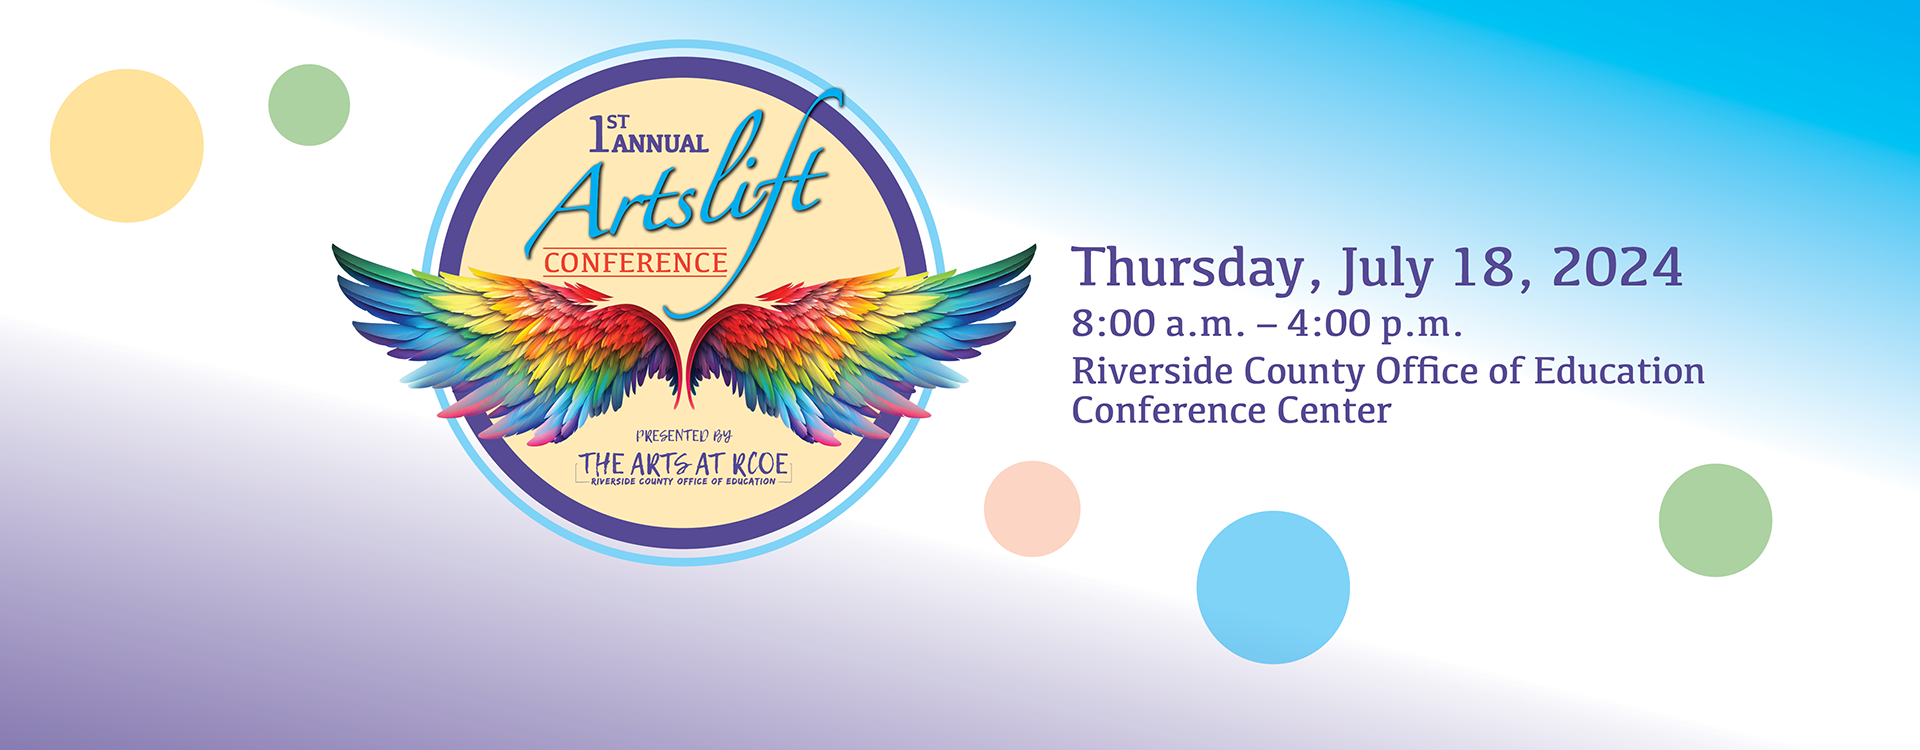 ArtsLift Conference Presented by The Arts at RCOE. July 18, 8:00 a.m. - 4:00 p.m. Riverside County Office of Education Conference Center